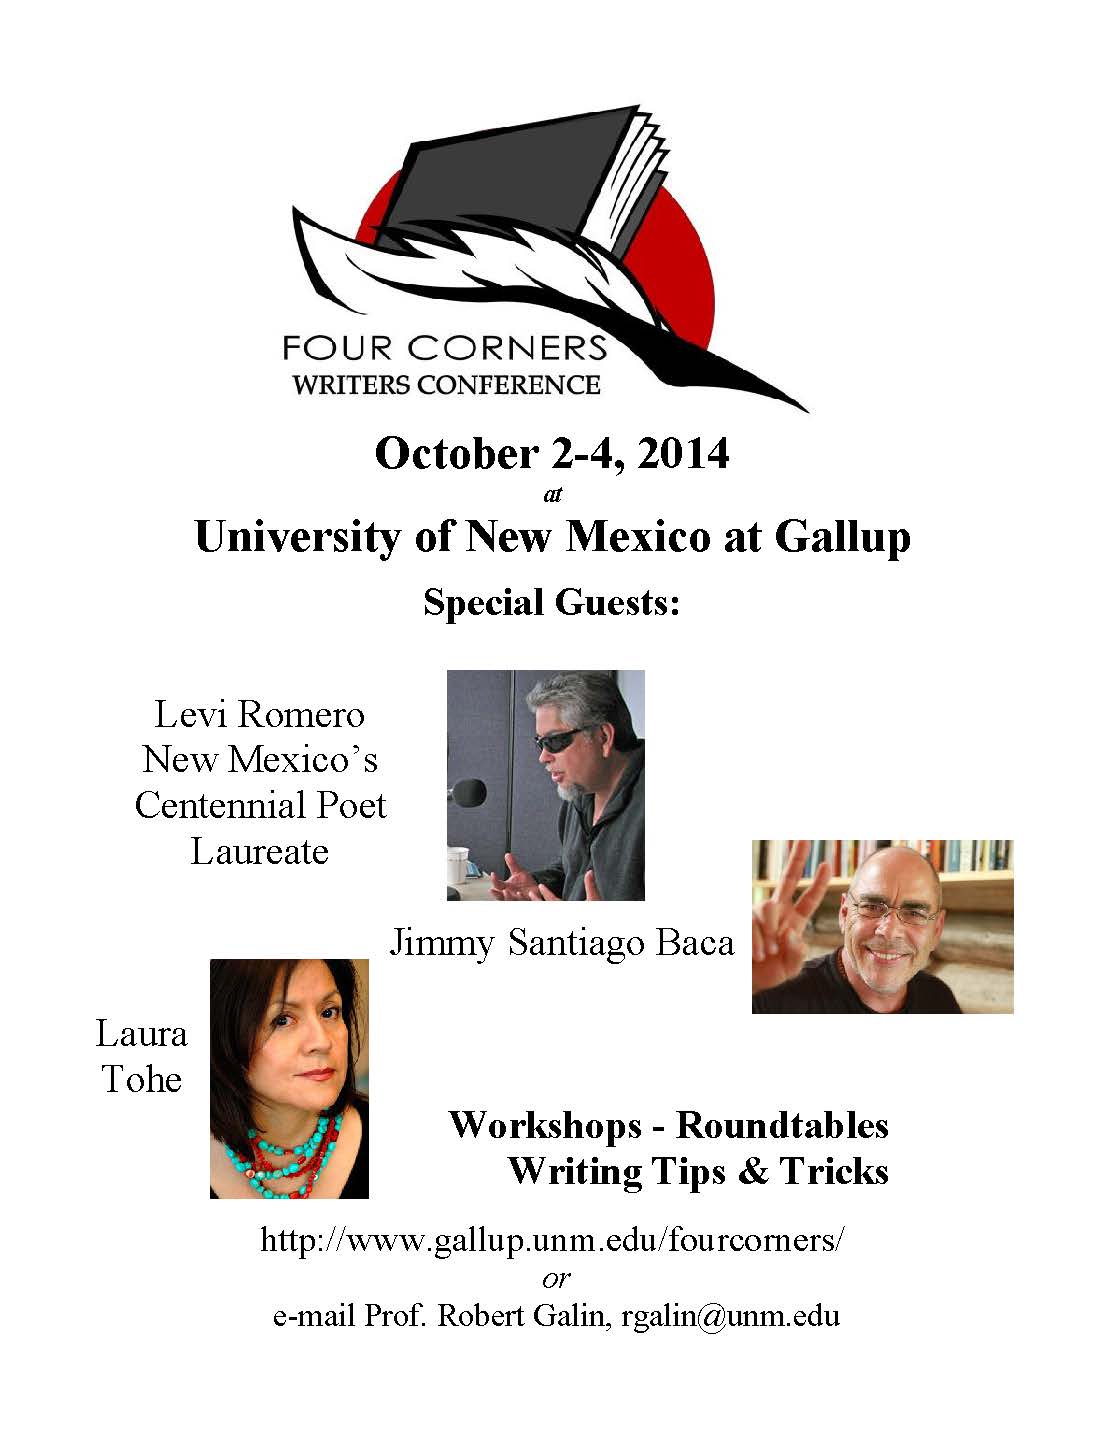 Four Corners Writers Conference Poster public